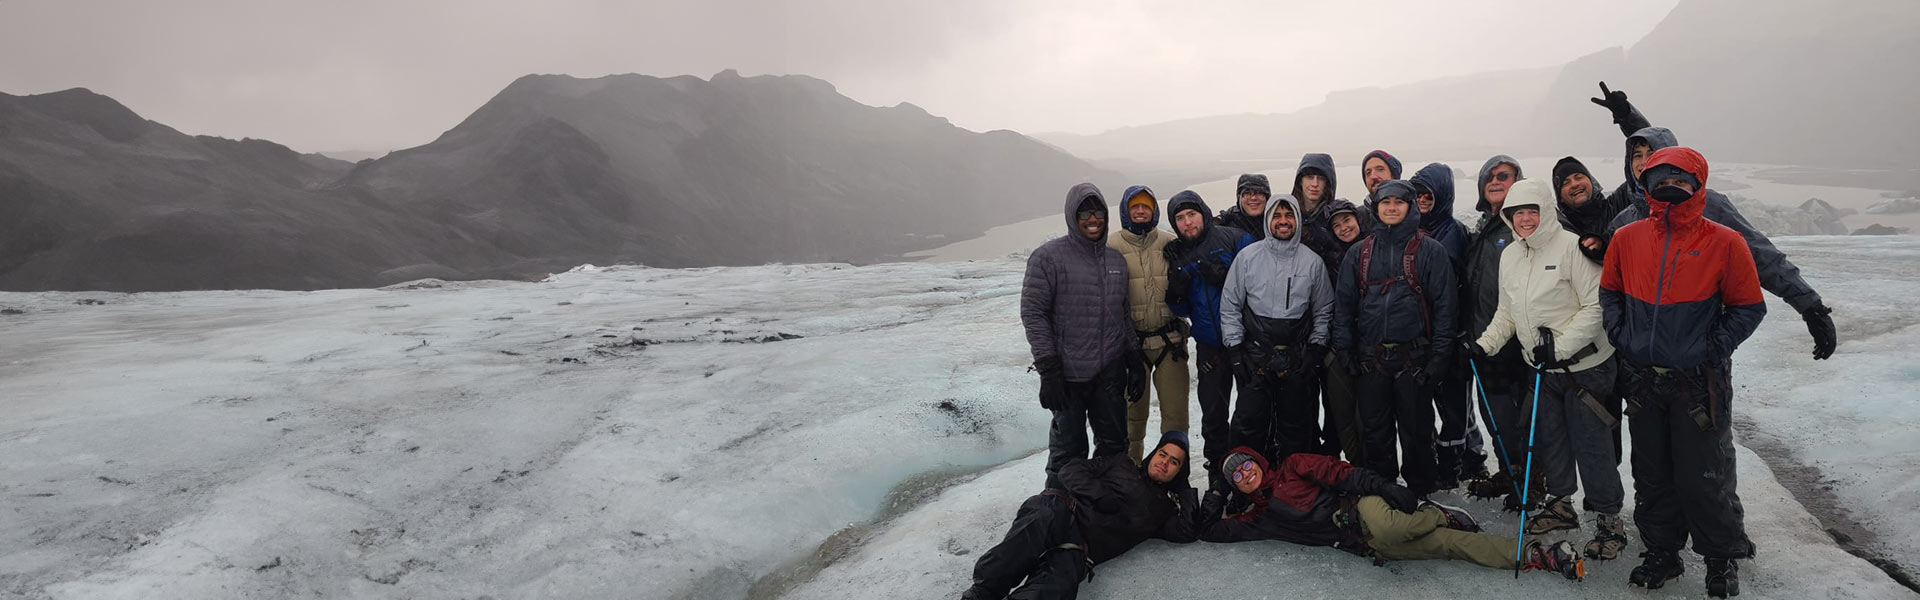 Group of students standing on a glacier in Iceland